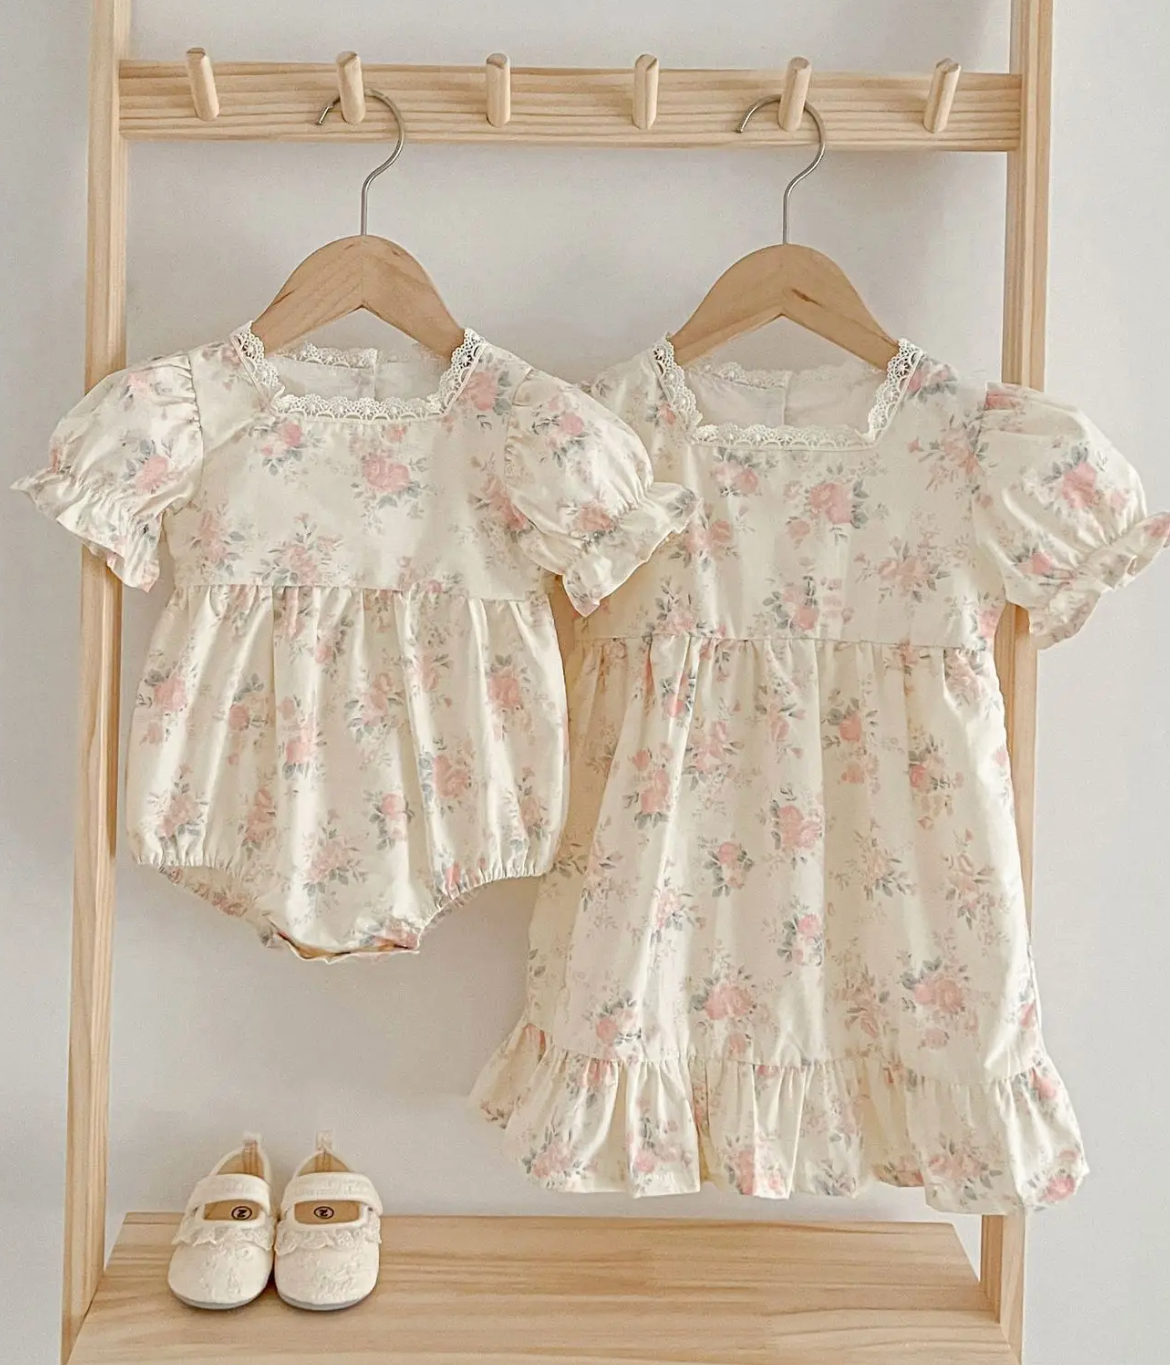 Baby Girls Romper - Light Pink Rose Vintage Floral - showing a romper and dress with same fabric - only romper available